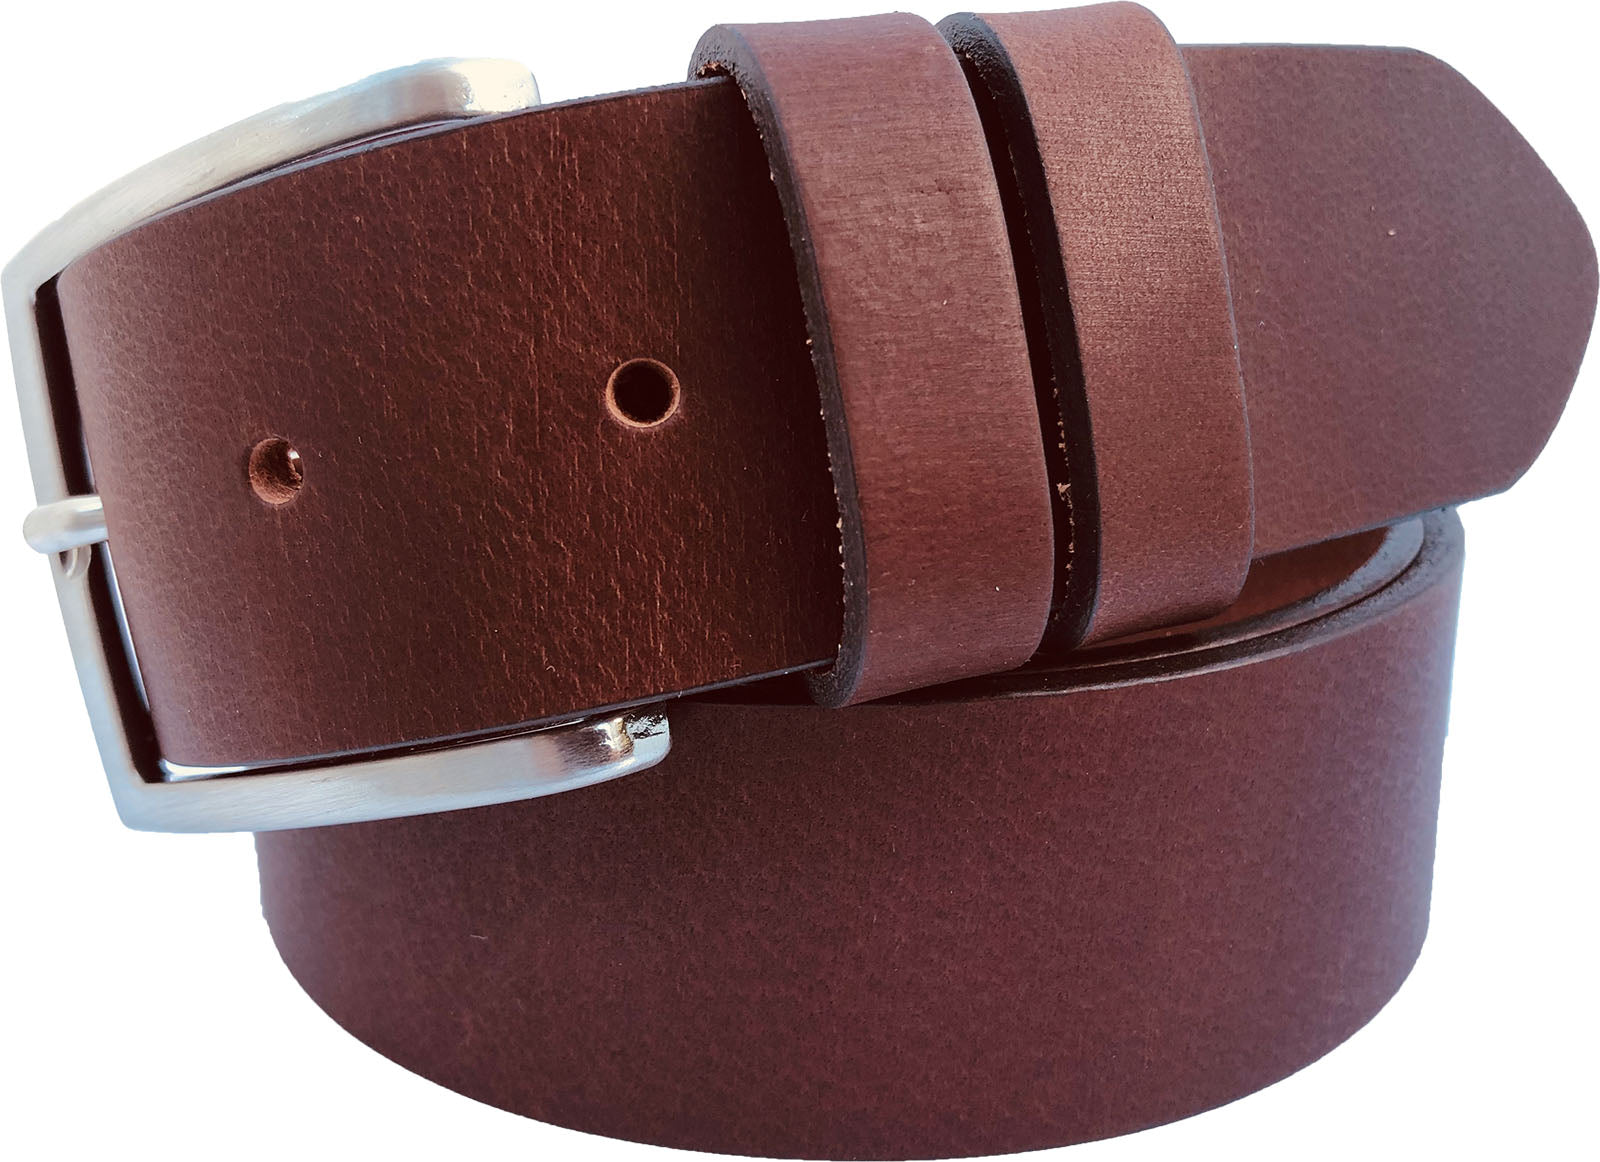 CHOCOLATE BROWN 40MM CLASSIC HIDE LEATHER BELT